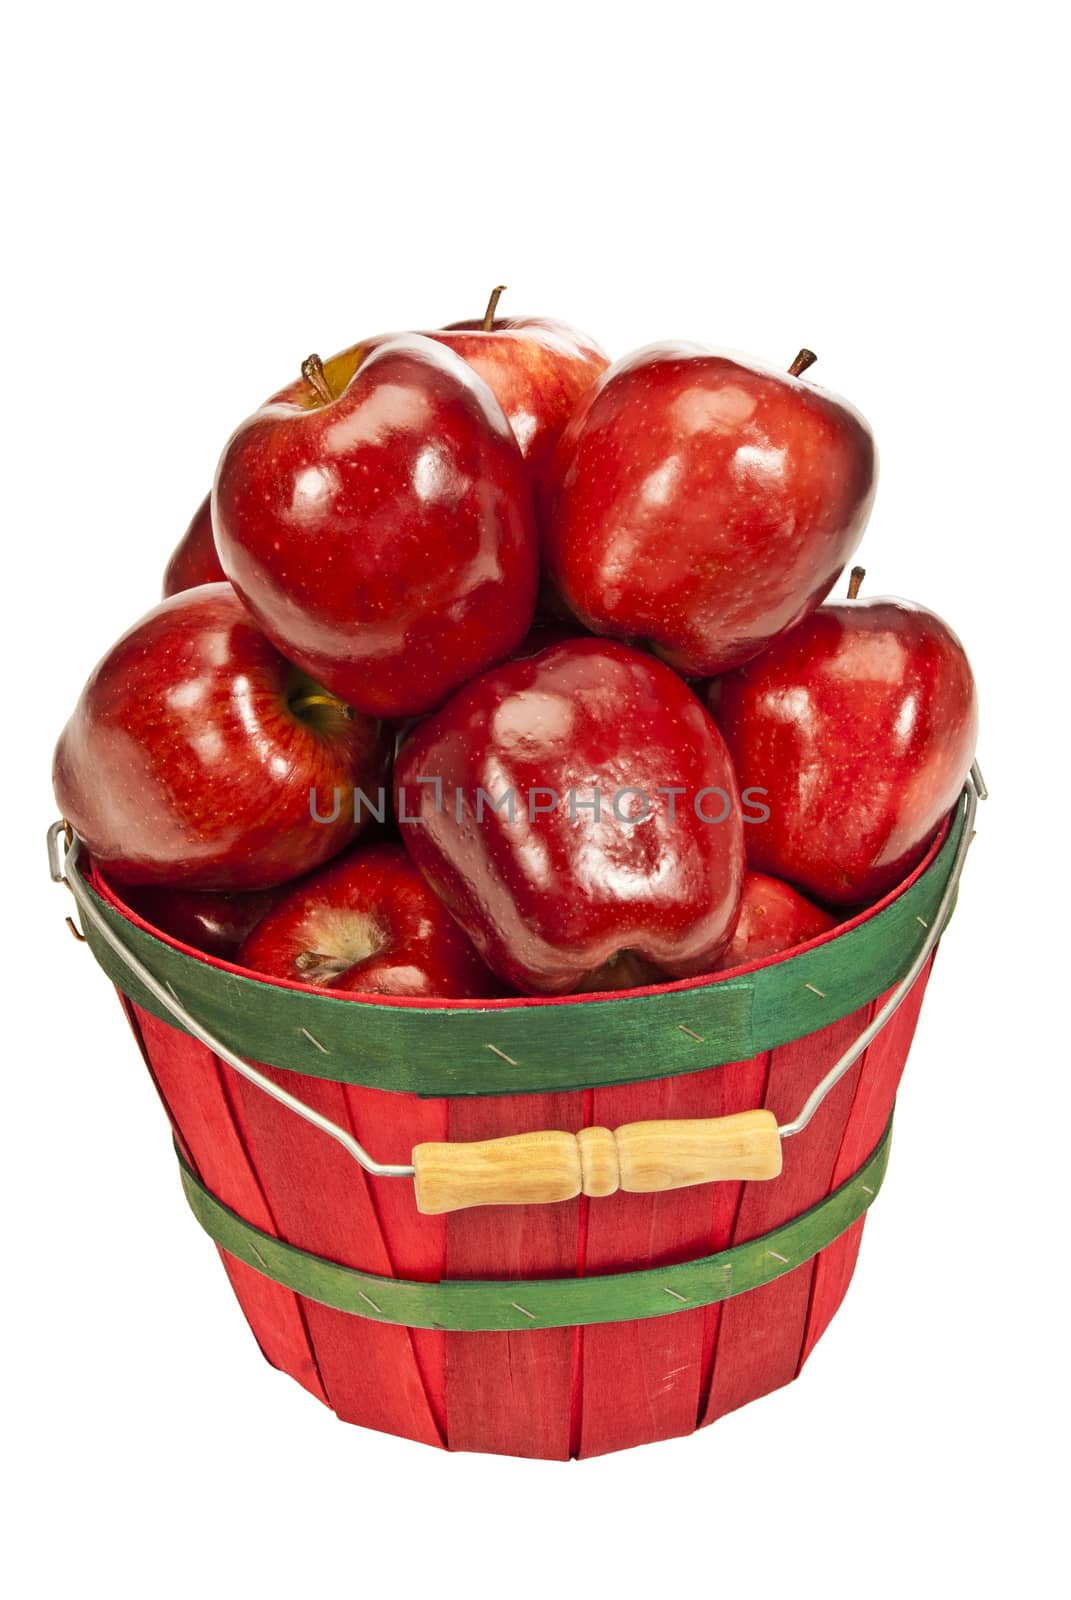 Vertical shot of a little red basket full of delicious red apples.  On white background